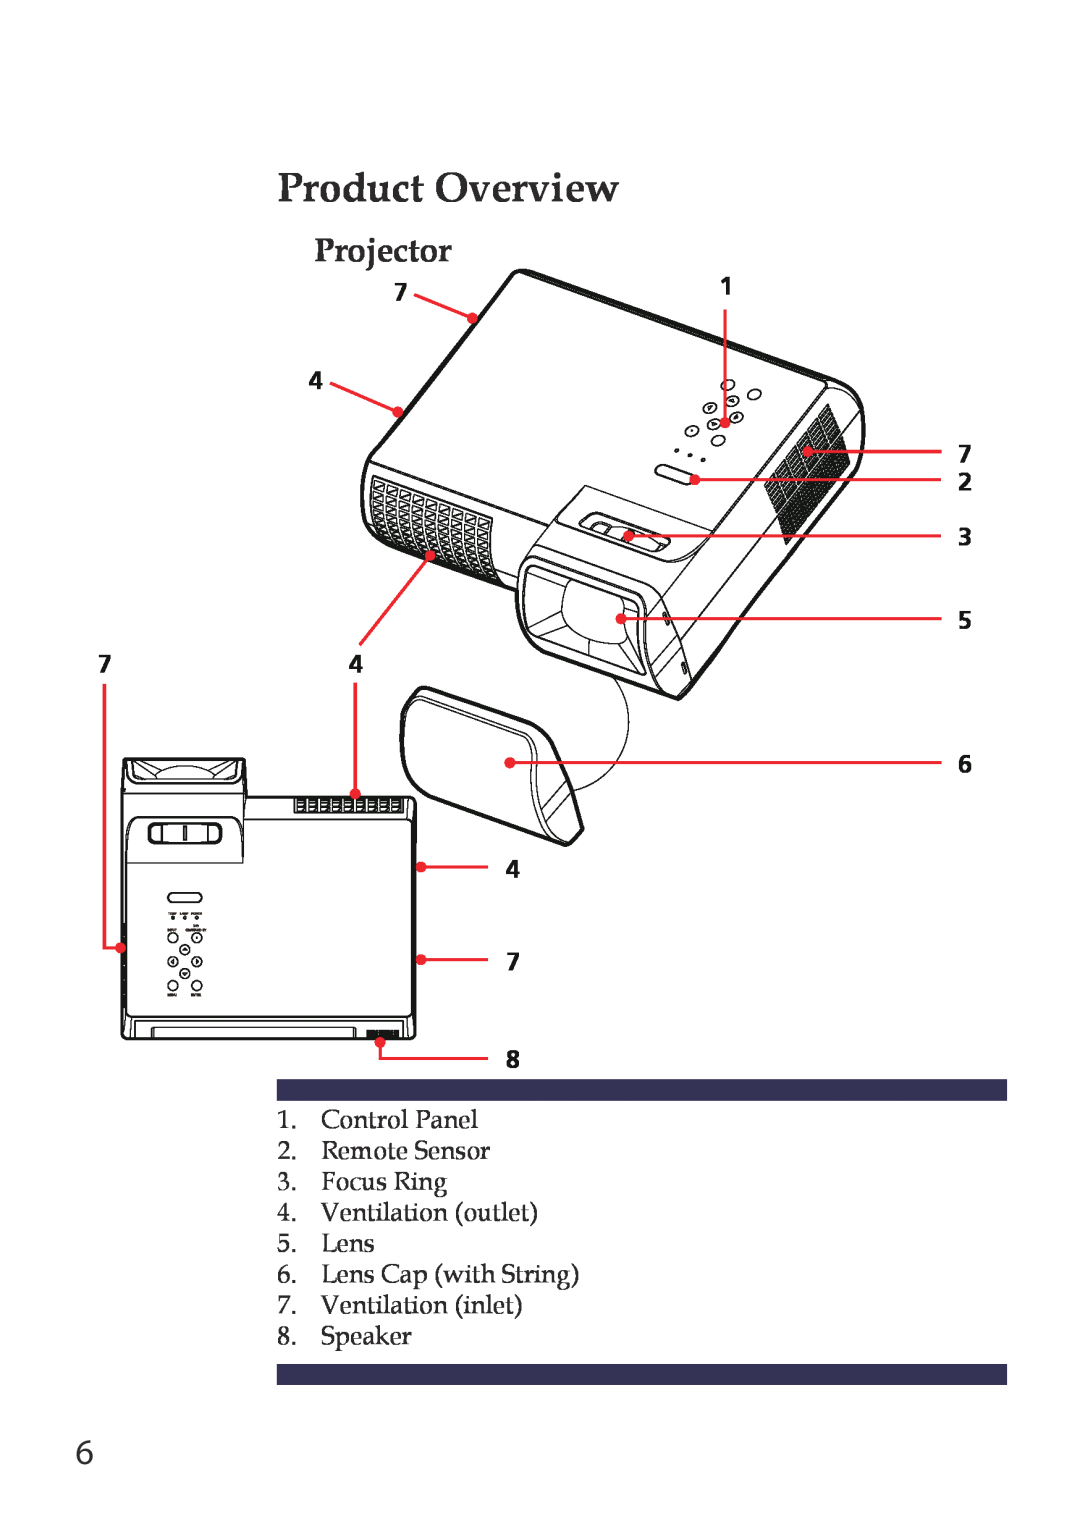 Sanyo PDG-DWL100 owner manual Product Overview, Projector 